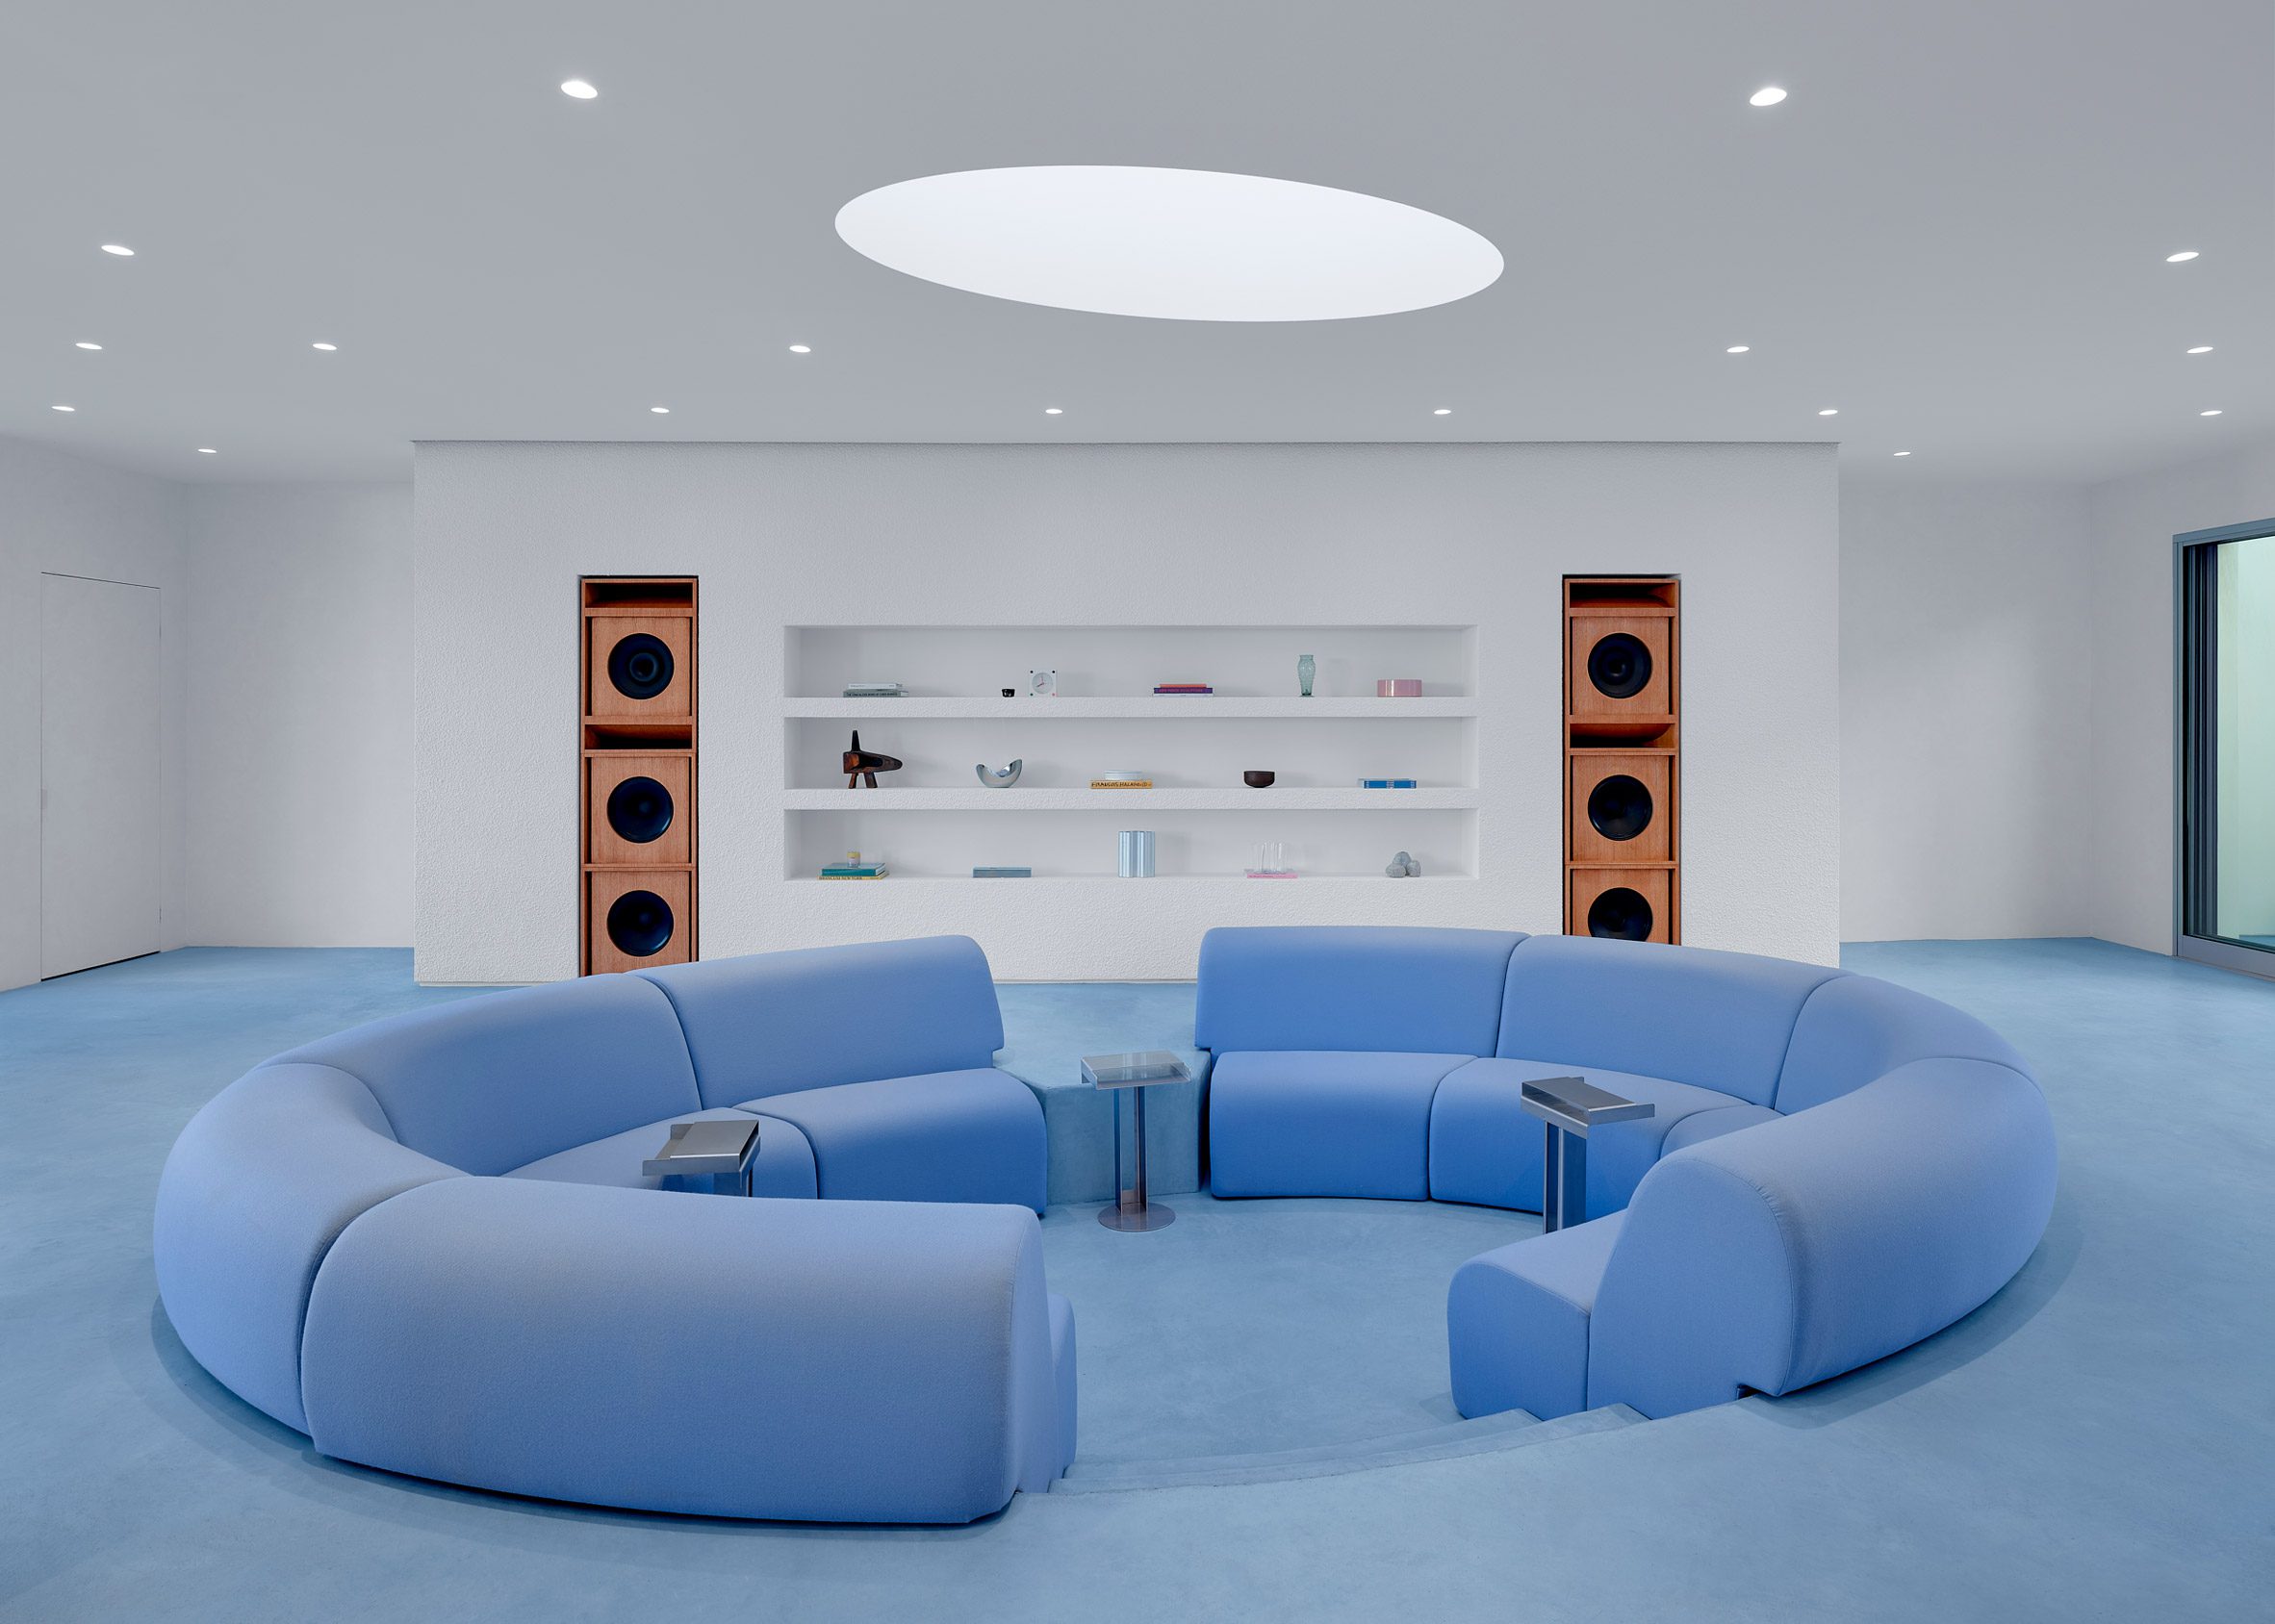 a conversation pit made of light blue seating